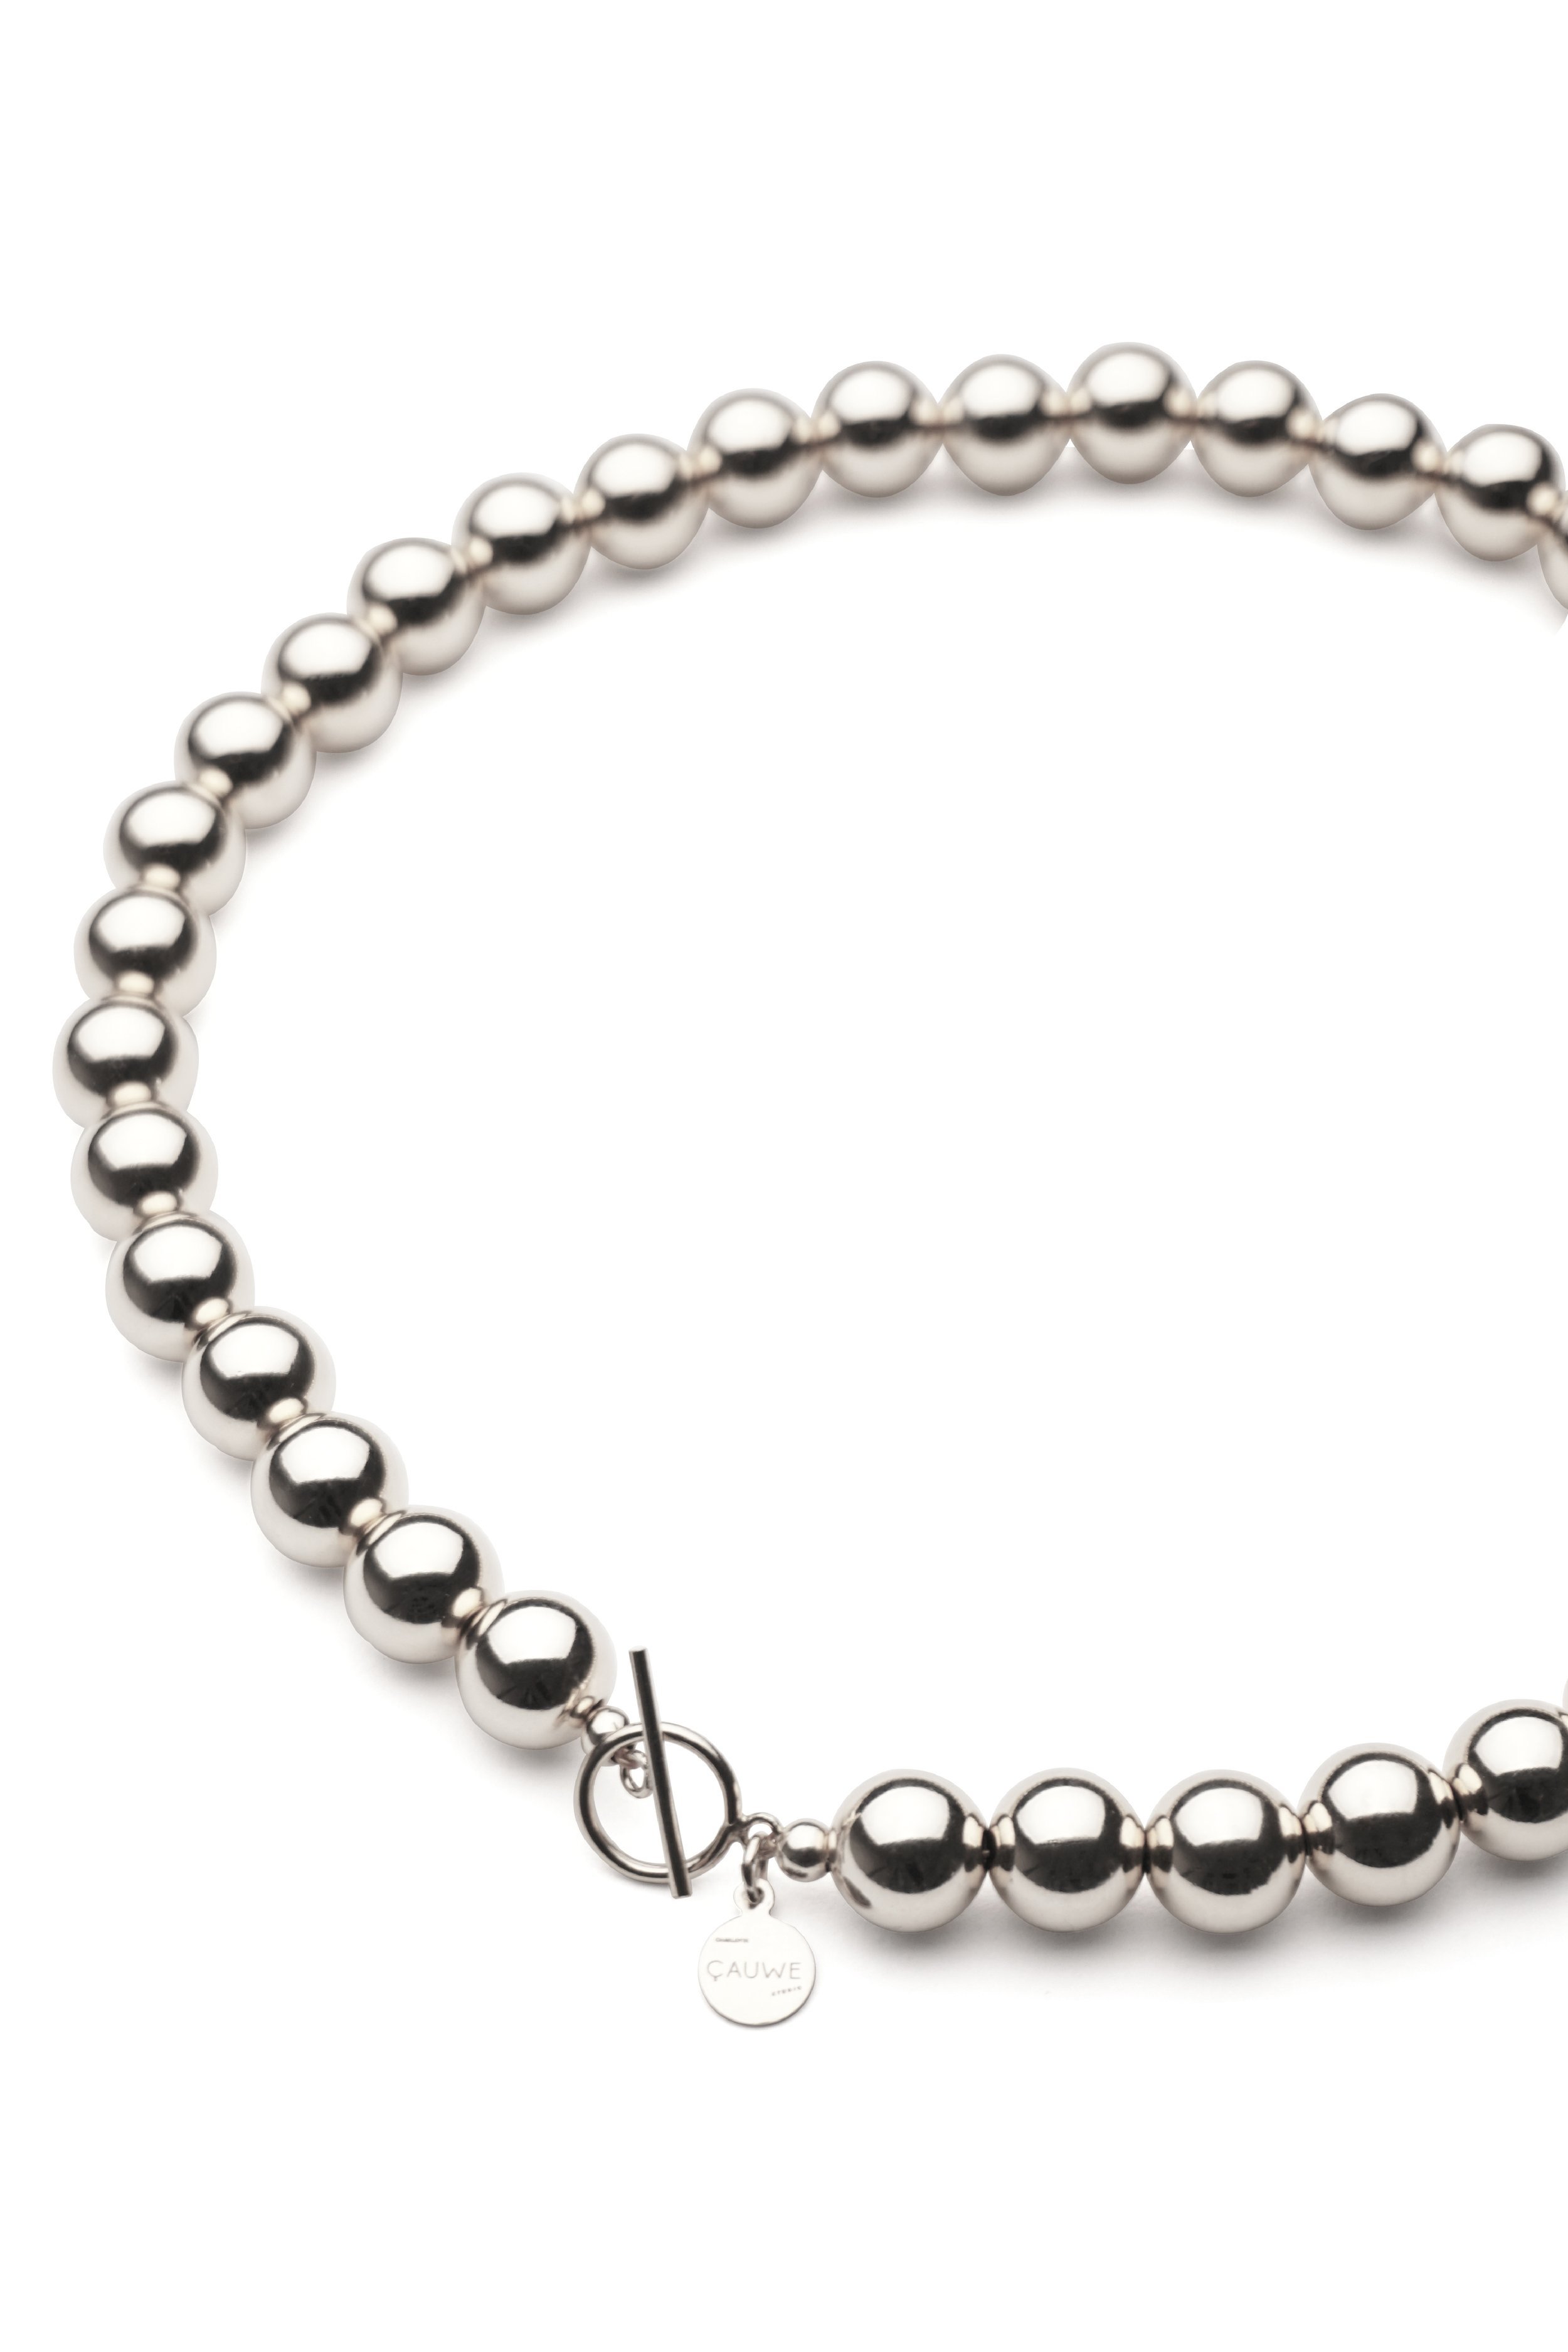 Silver beads necklace | Silver jewelry fashion, Silver bead necklace, Black beaded  jewelry